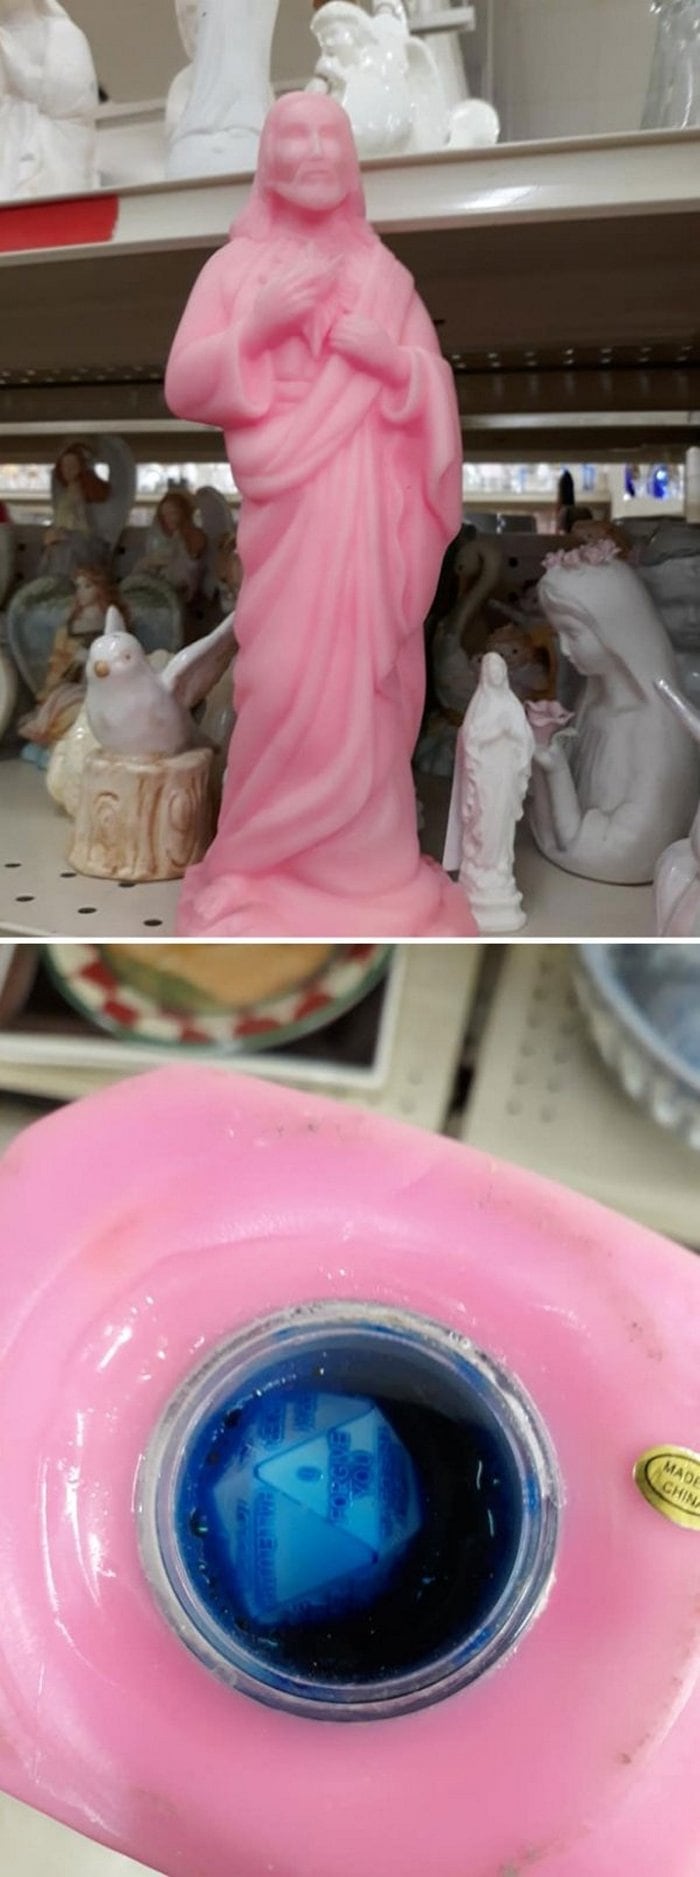 Most Incredible Items Ever Found At Thrift Stores (35 Photos)-28